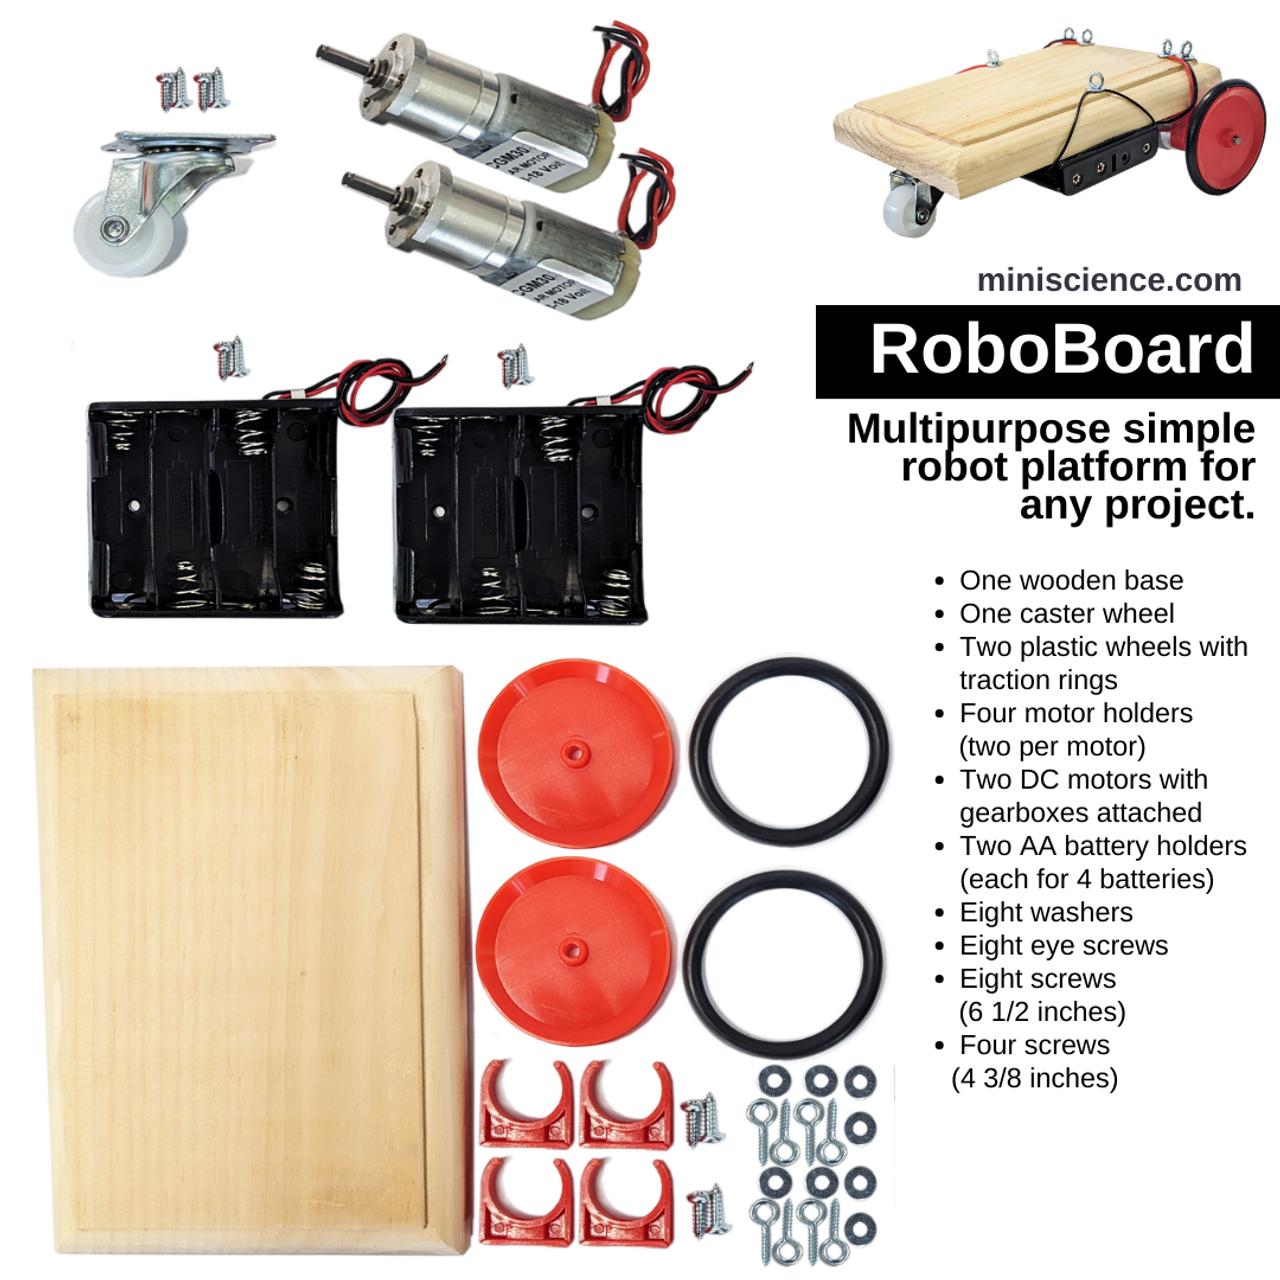 The RoboBoard is a highly adaptable and customizable robotic platform, perfect for educational purposes, DIY projects, and prototype development. It features a durable wooden base that provides a robust foundation for various applications. This platform is equipped with a caster wheel for smooth navigation, two plastic wheels with traction rings for optimal grip, and two powerful DC motors with gearboxes for precise speed and direction control. It also includes two AA battery holders, motor holders, and a comprehensive set of assembly components for easy customization and assembly. The RoboBoard is engineered for simplicity, adaptability, and encourages creativity and innovation in the field of robotics.